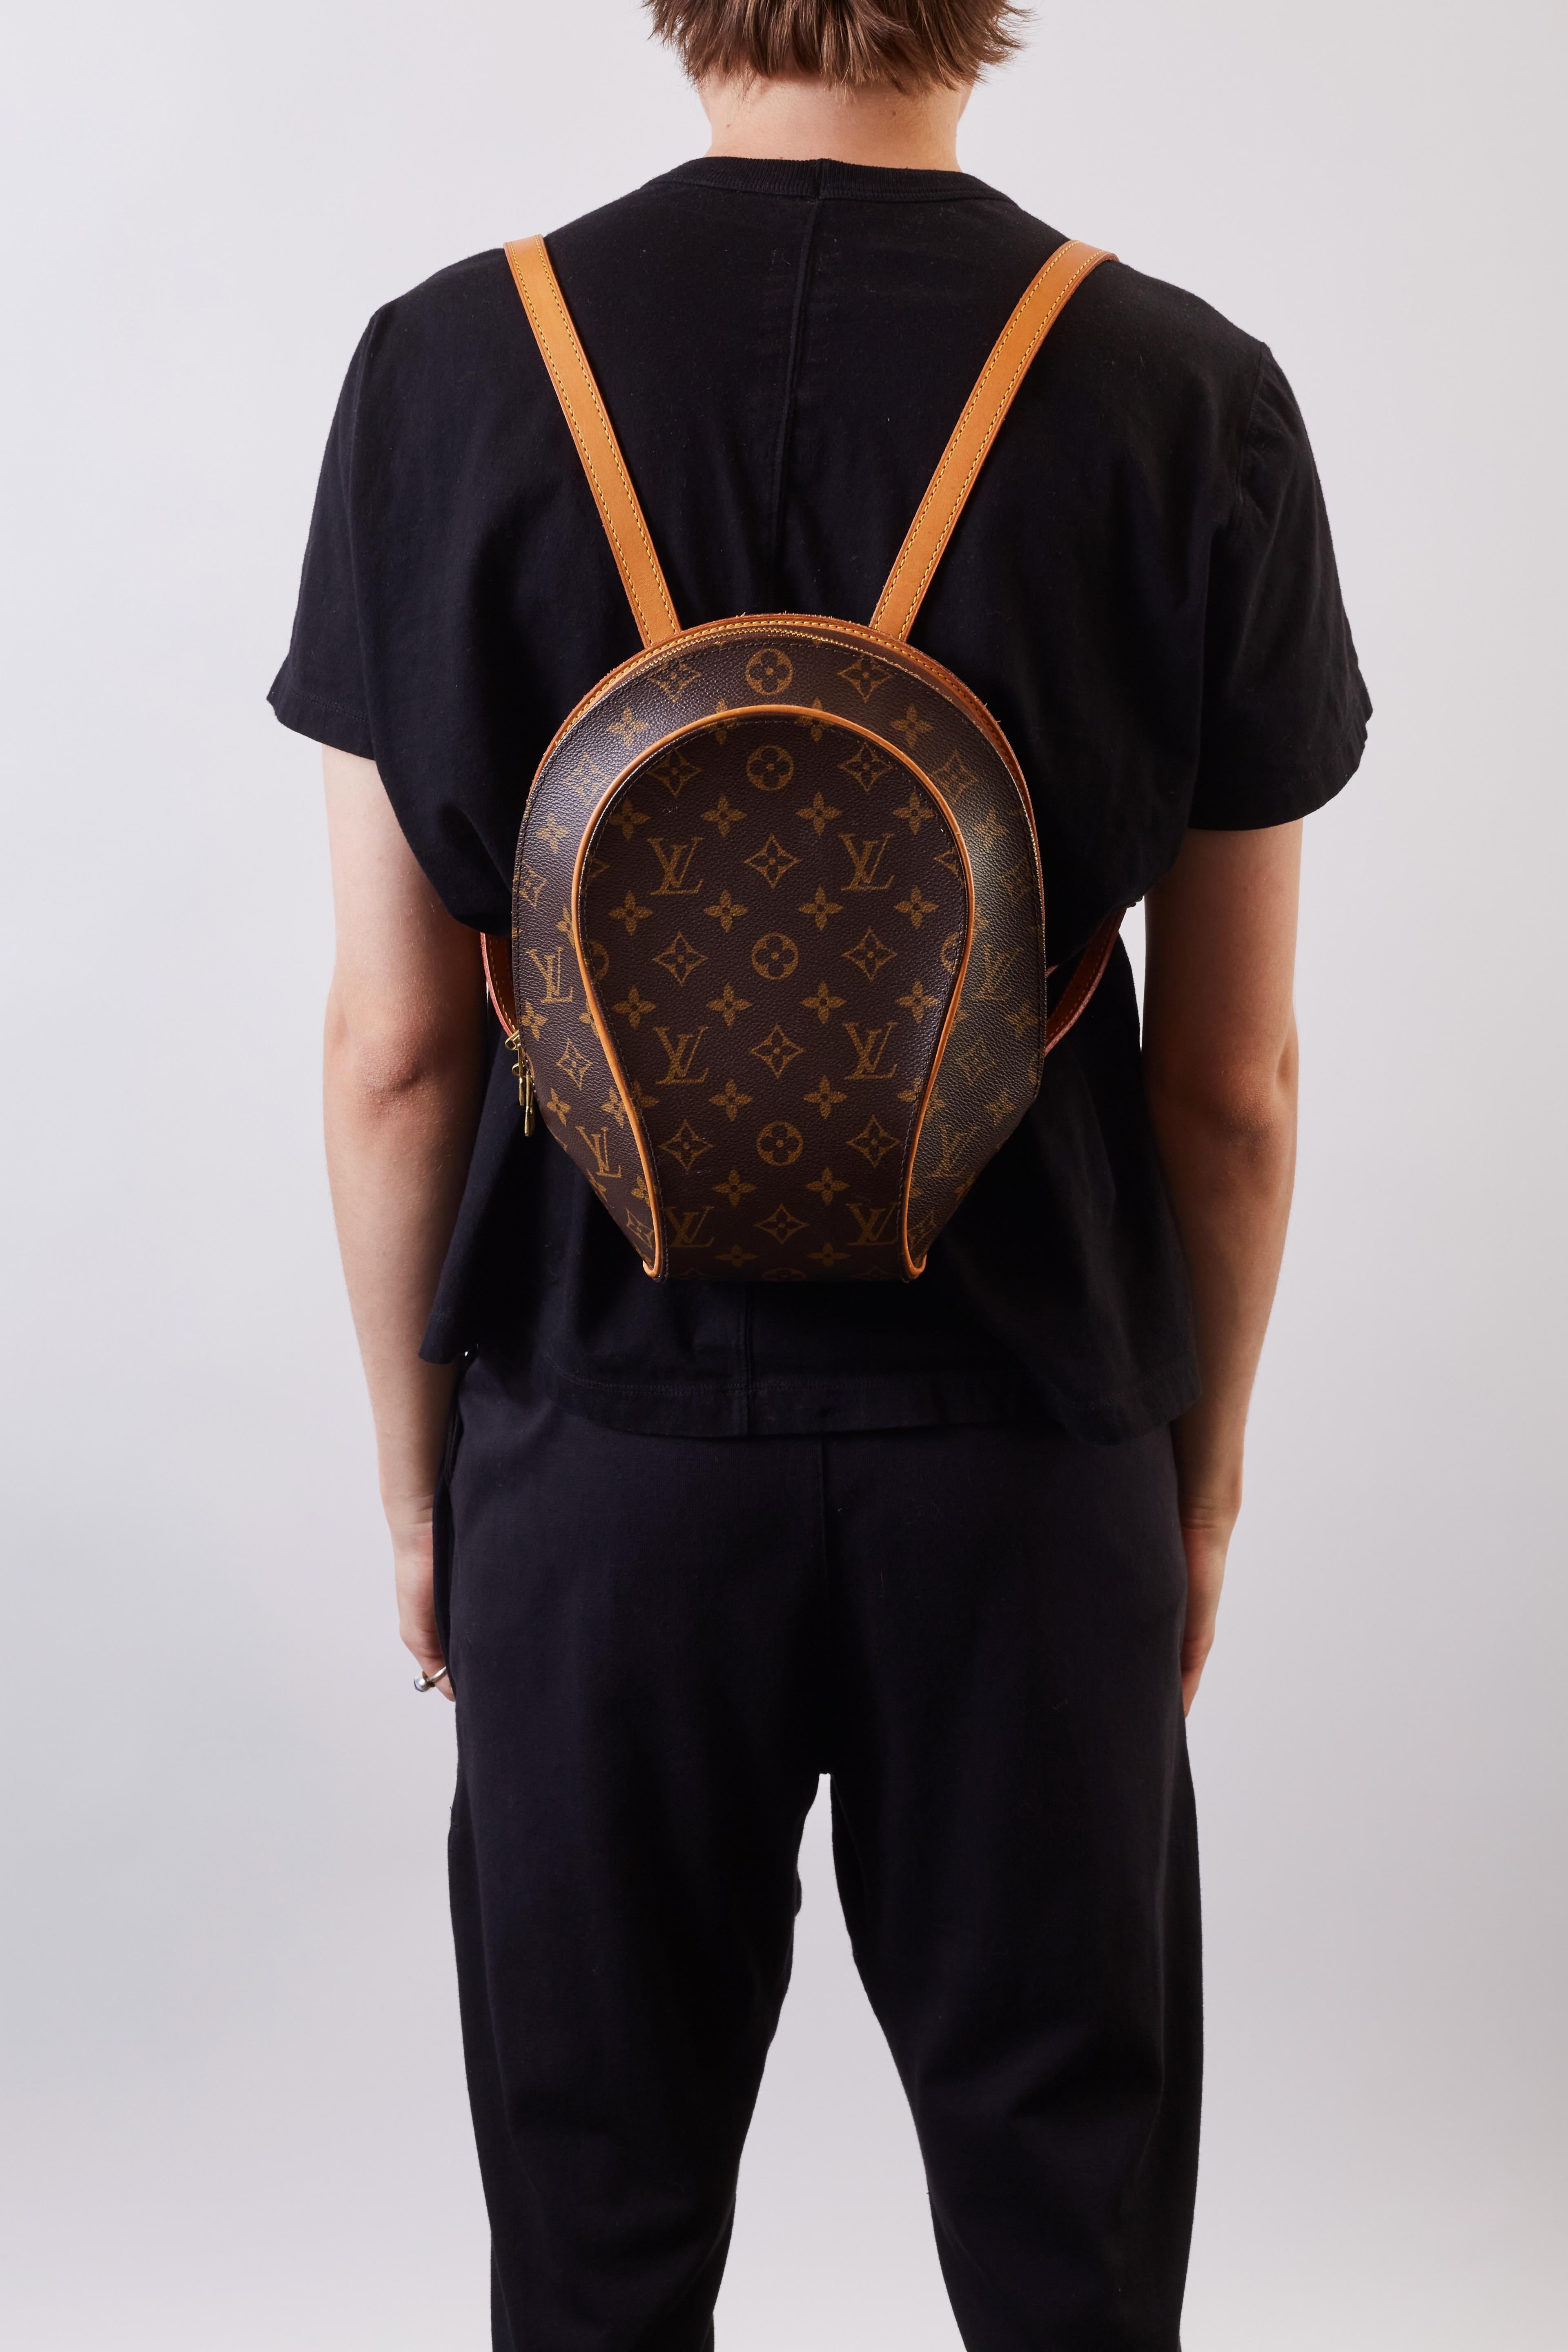 This backpack is made of classic Louis Vuitton monogram coated canvas with signature vachetta natural cowhide trim and adjustable shoulder straps for structure and style. There is a brass wrap-around zipper that opens to an interior of cocoa brown